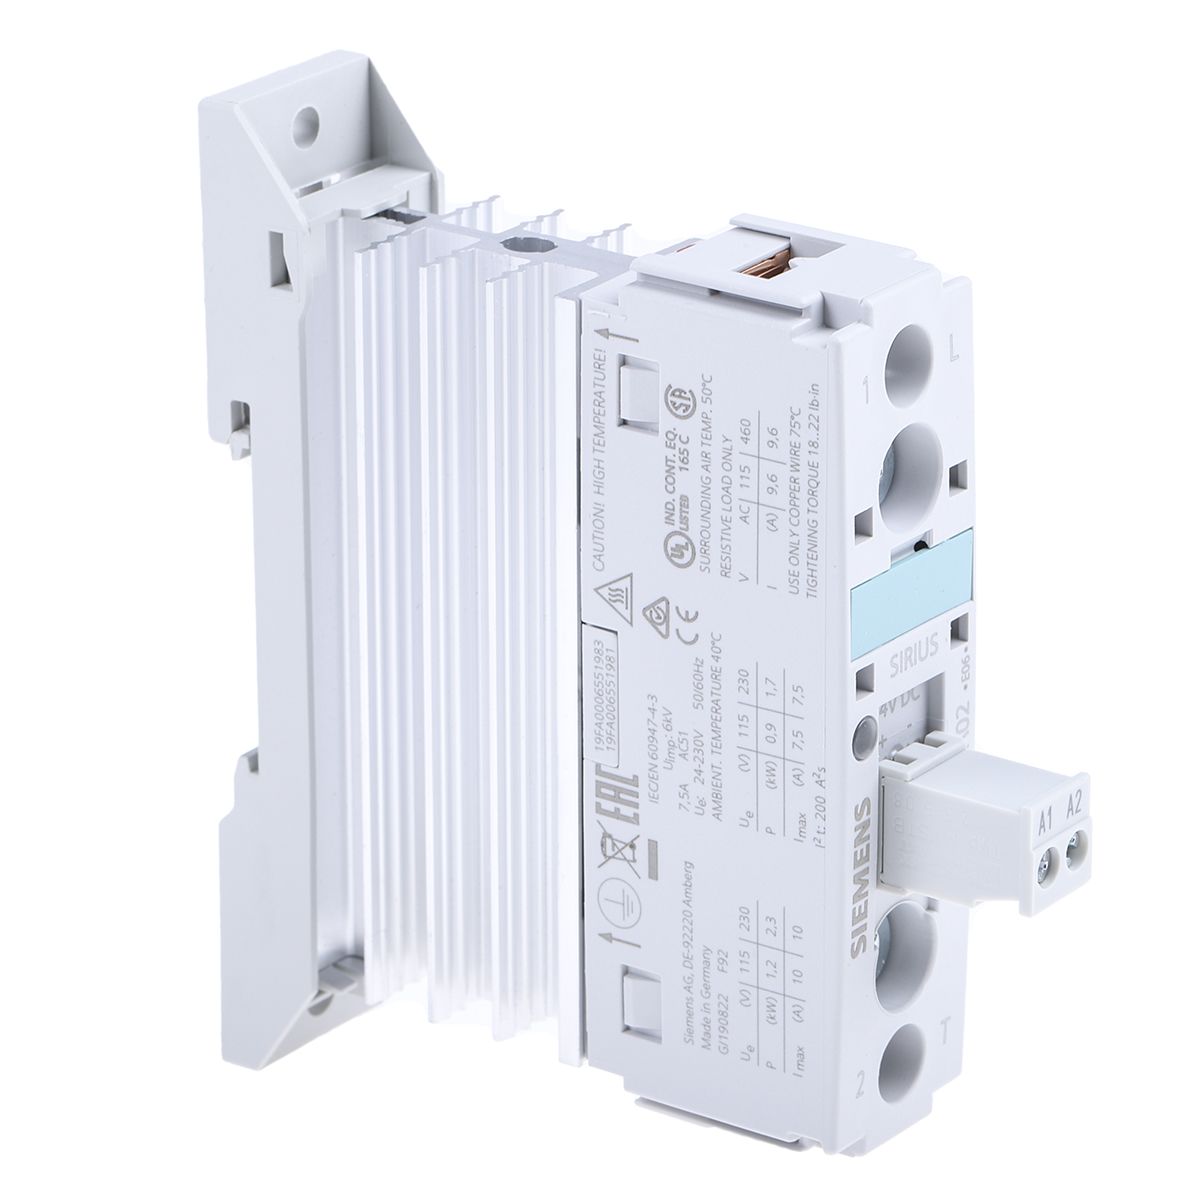 Siemens DIN Rail Solid State Relay, 10.5 A Max. Load, 230 V Max. Load, 24 V dc Max. Control